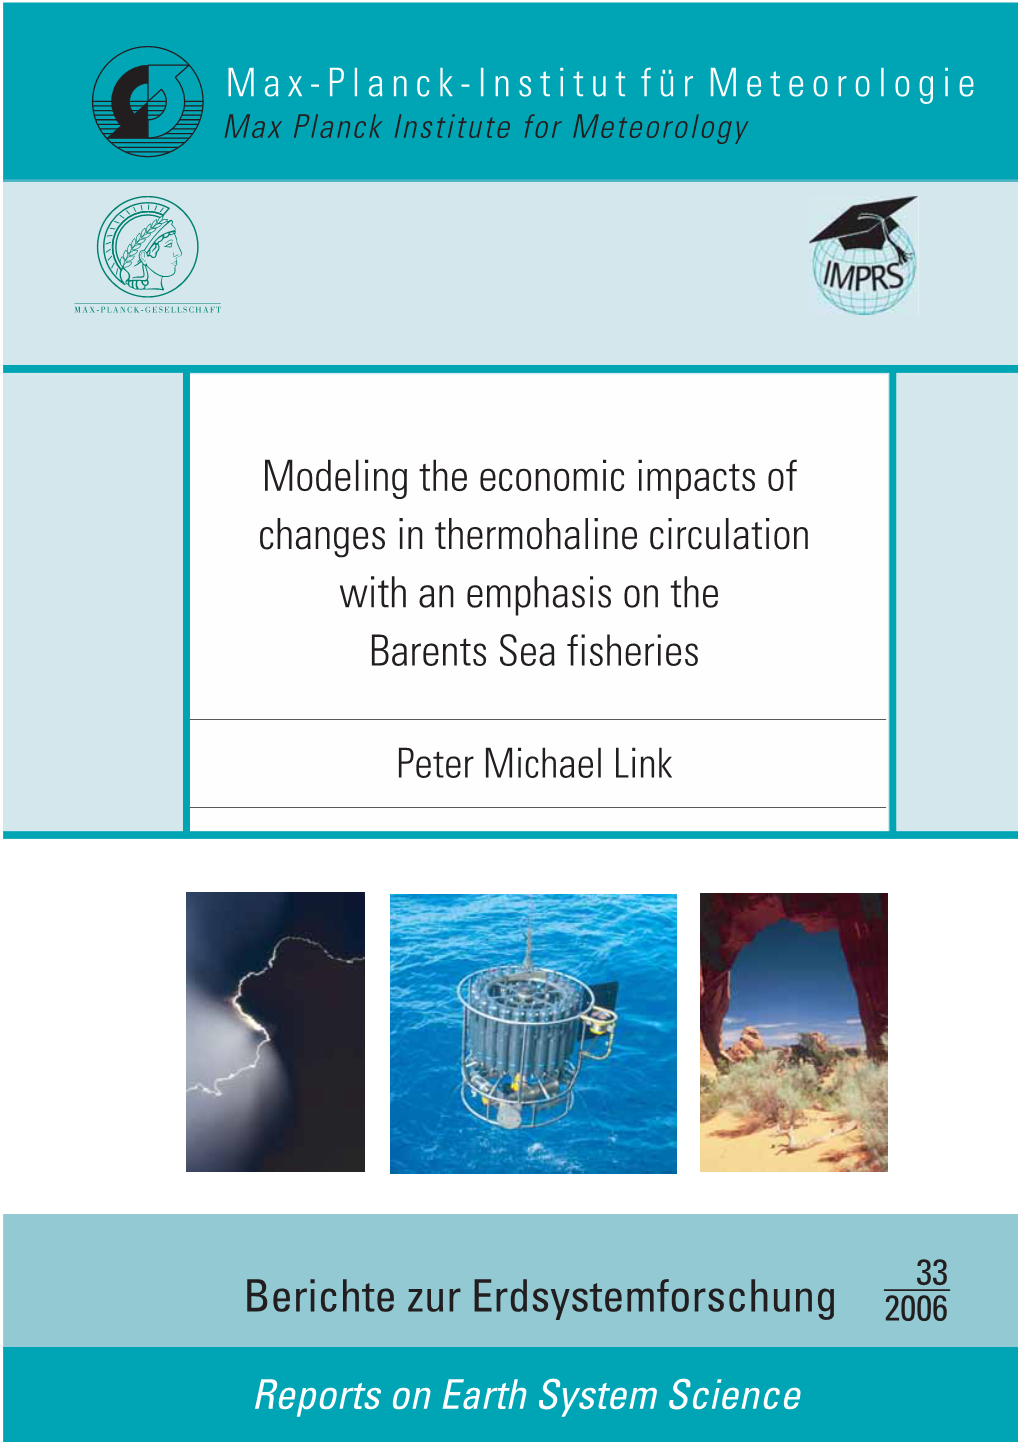 Modeling the Economic Impacts of Changes in Thermohaline Circulation with an Emphasis on the Barents Sea Fisheries